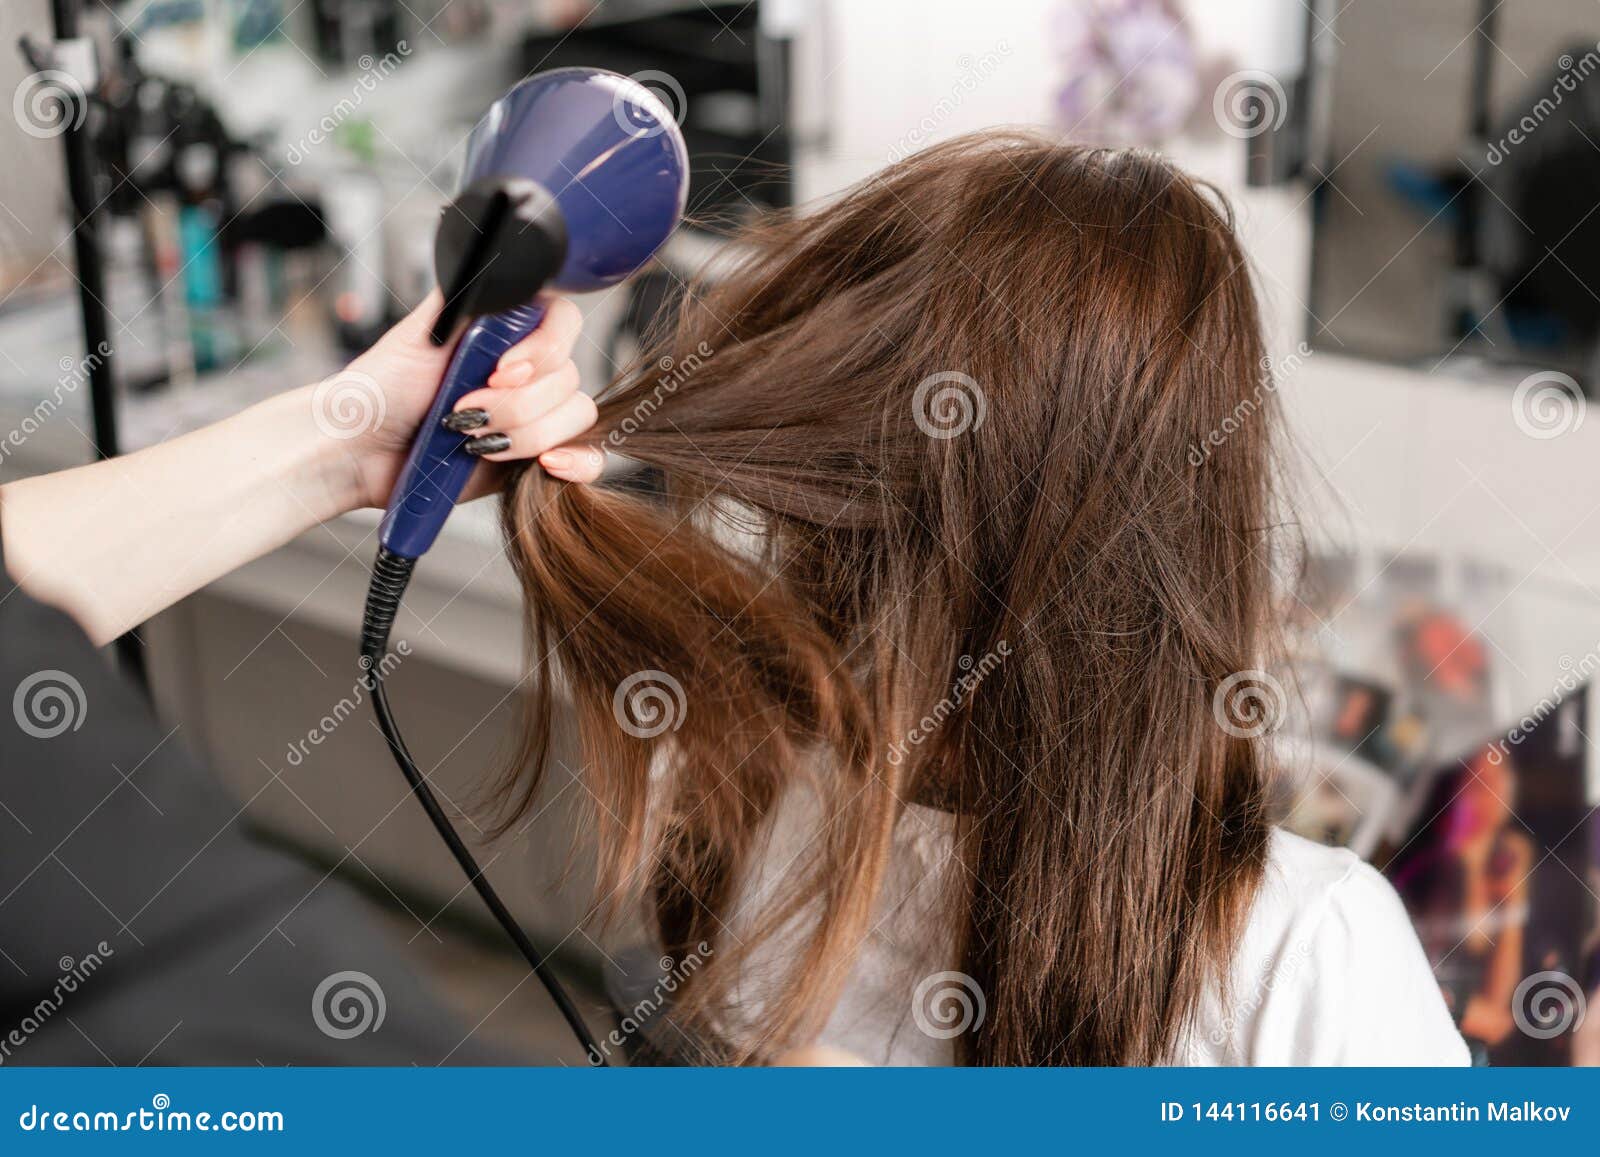 Young Woman And Hairdresser With Fan Making Hot Styling At Hair